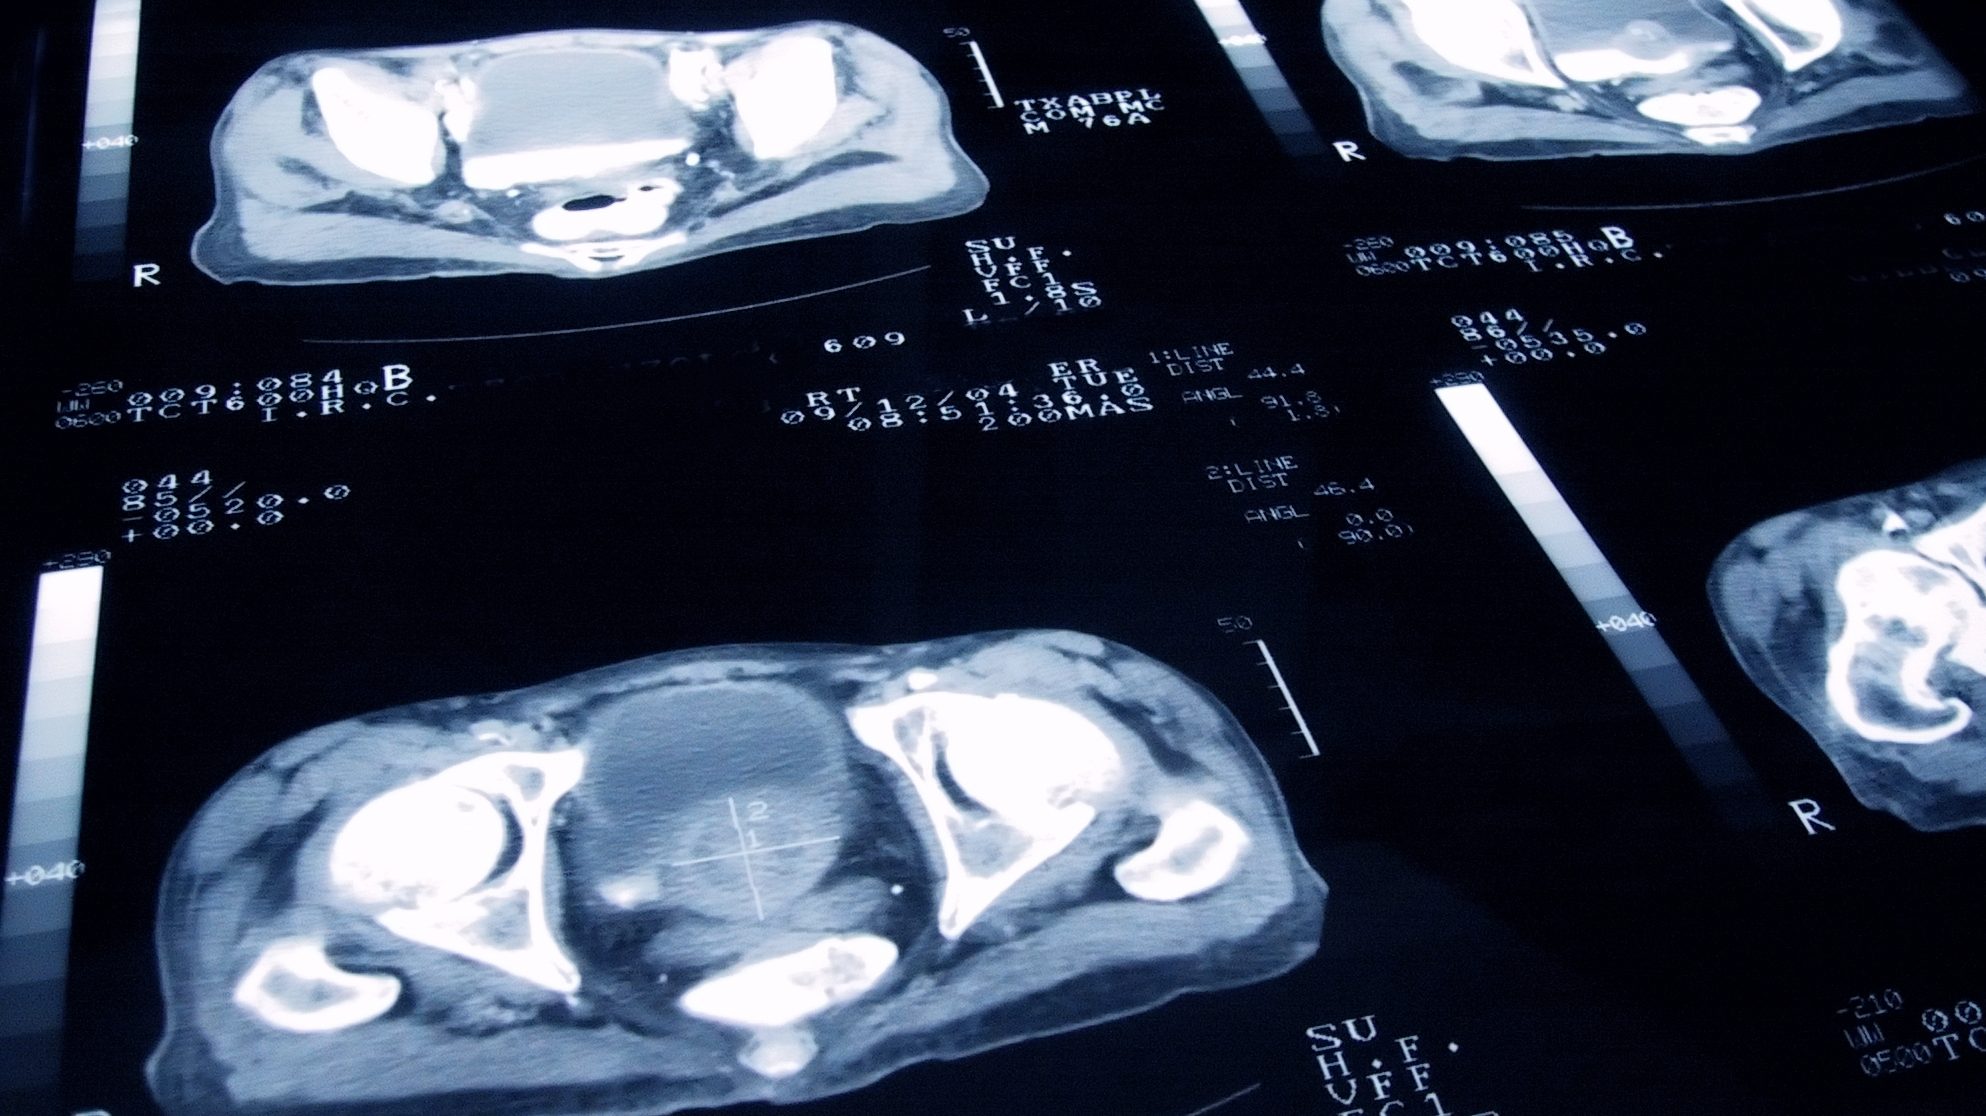 Rates Of Metastatic Prostate Cancer Are On The Rise – Are Screening Guidelines To Blame?